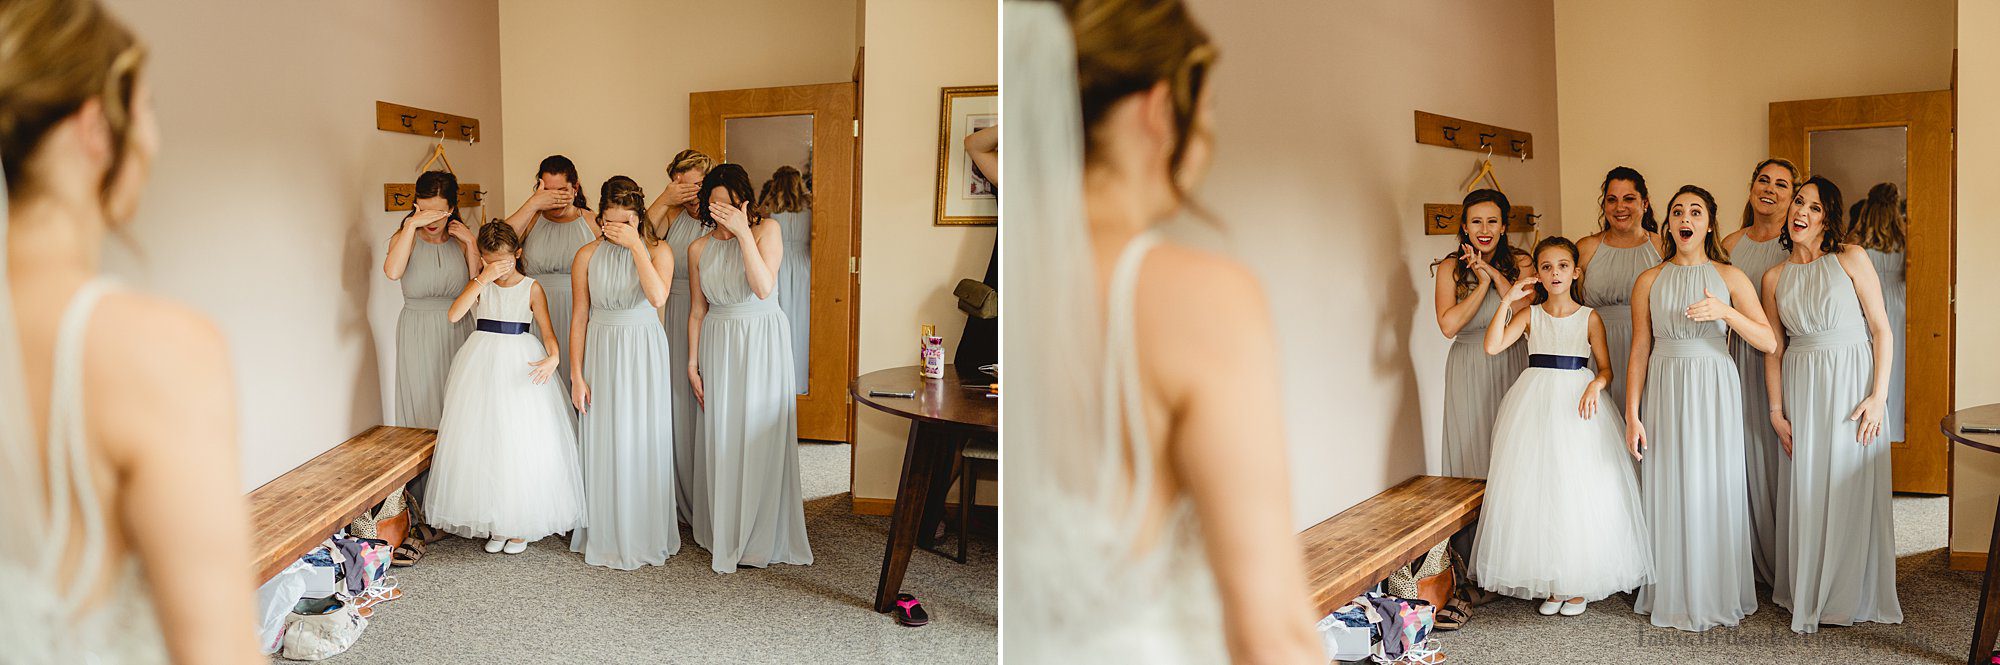 bridesmaids first look at bride, Laura Hollander Photography, Southwest Michigan photographer